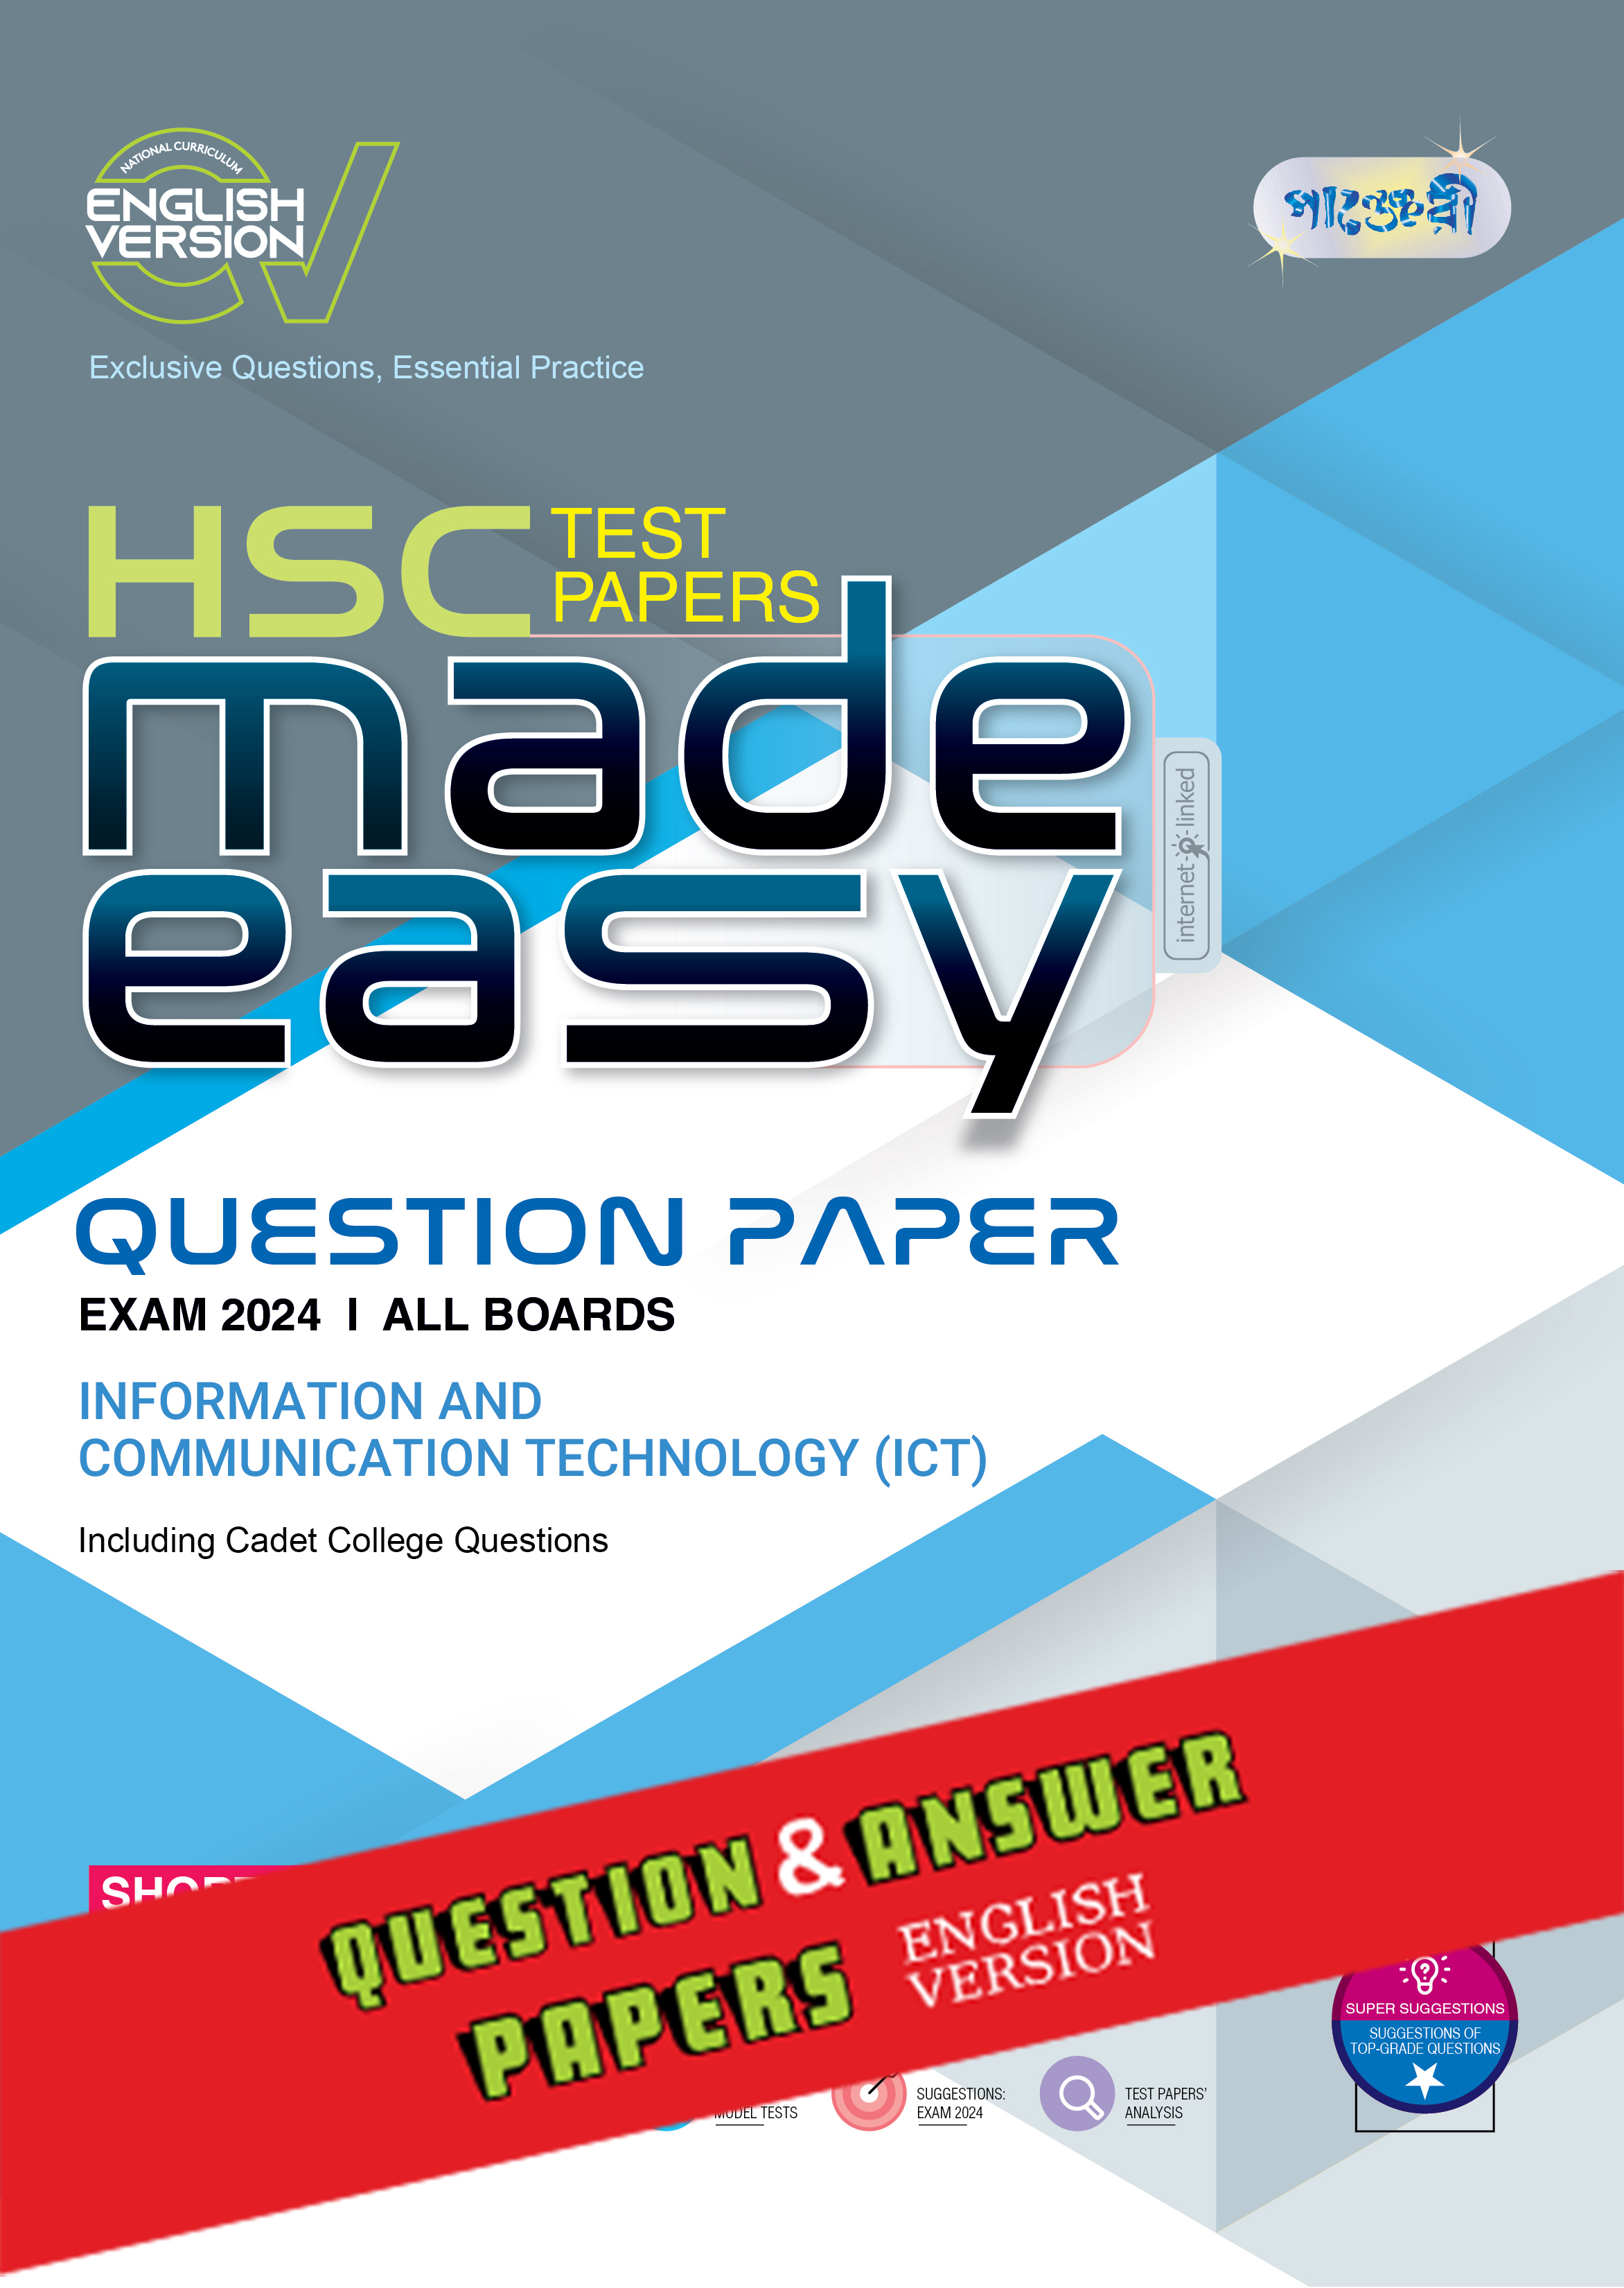 Panjeree Information & Communication Technology (ICT) - HSC 2024 Test Papers Made Easy (Question + Answer Paper) - English Version (পেপারব্যাক)